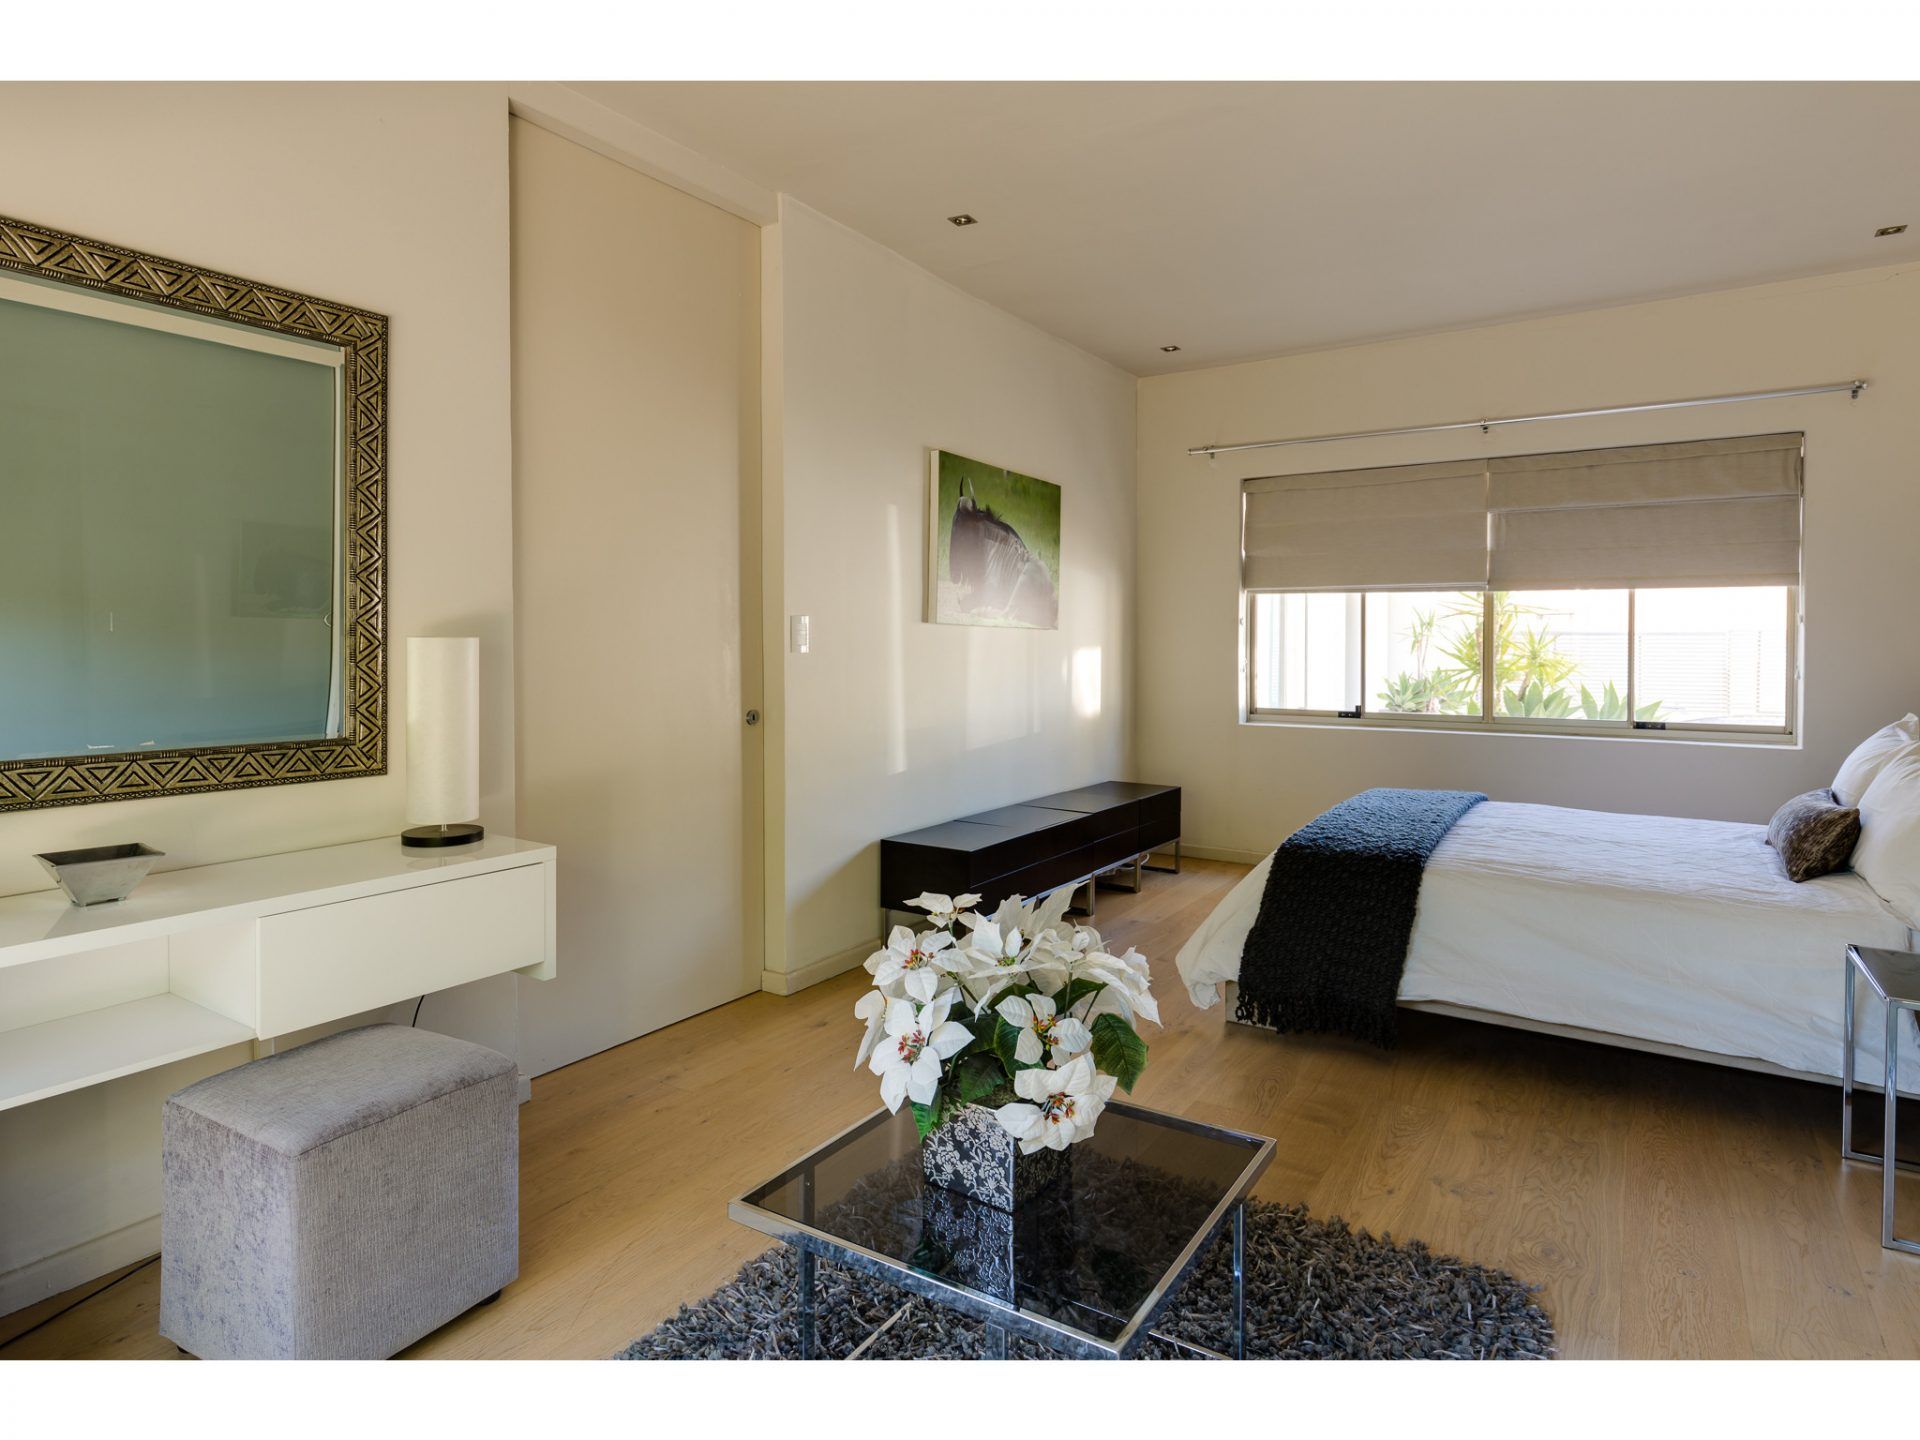 Photo 13 of Geneva Sunsets accommodation in Camps Bay, Cape Town with 6 bedrooms and 7 bathrooms